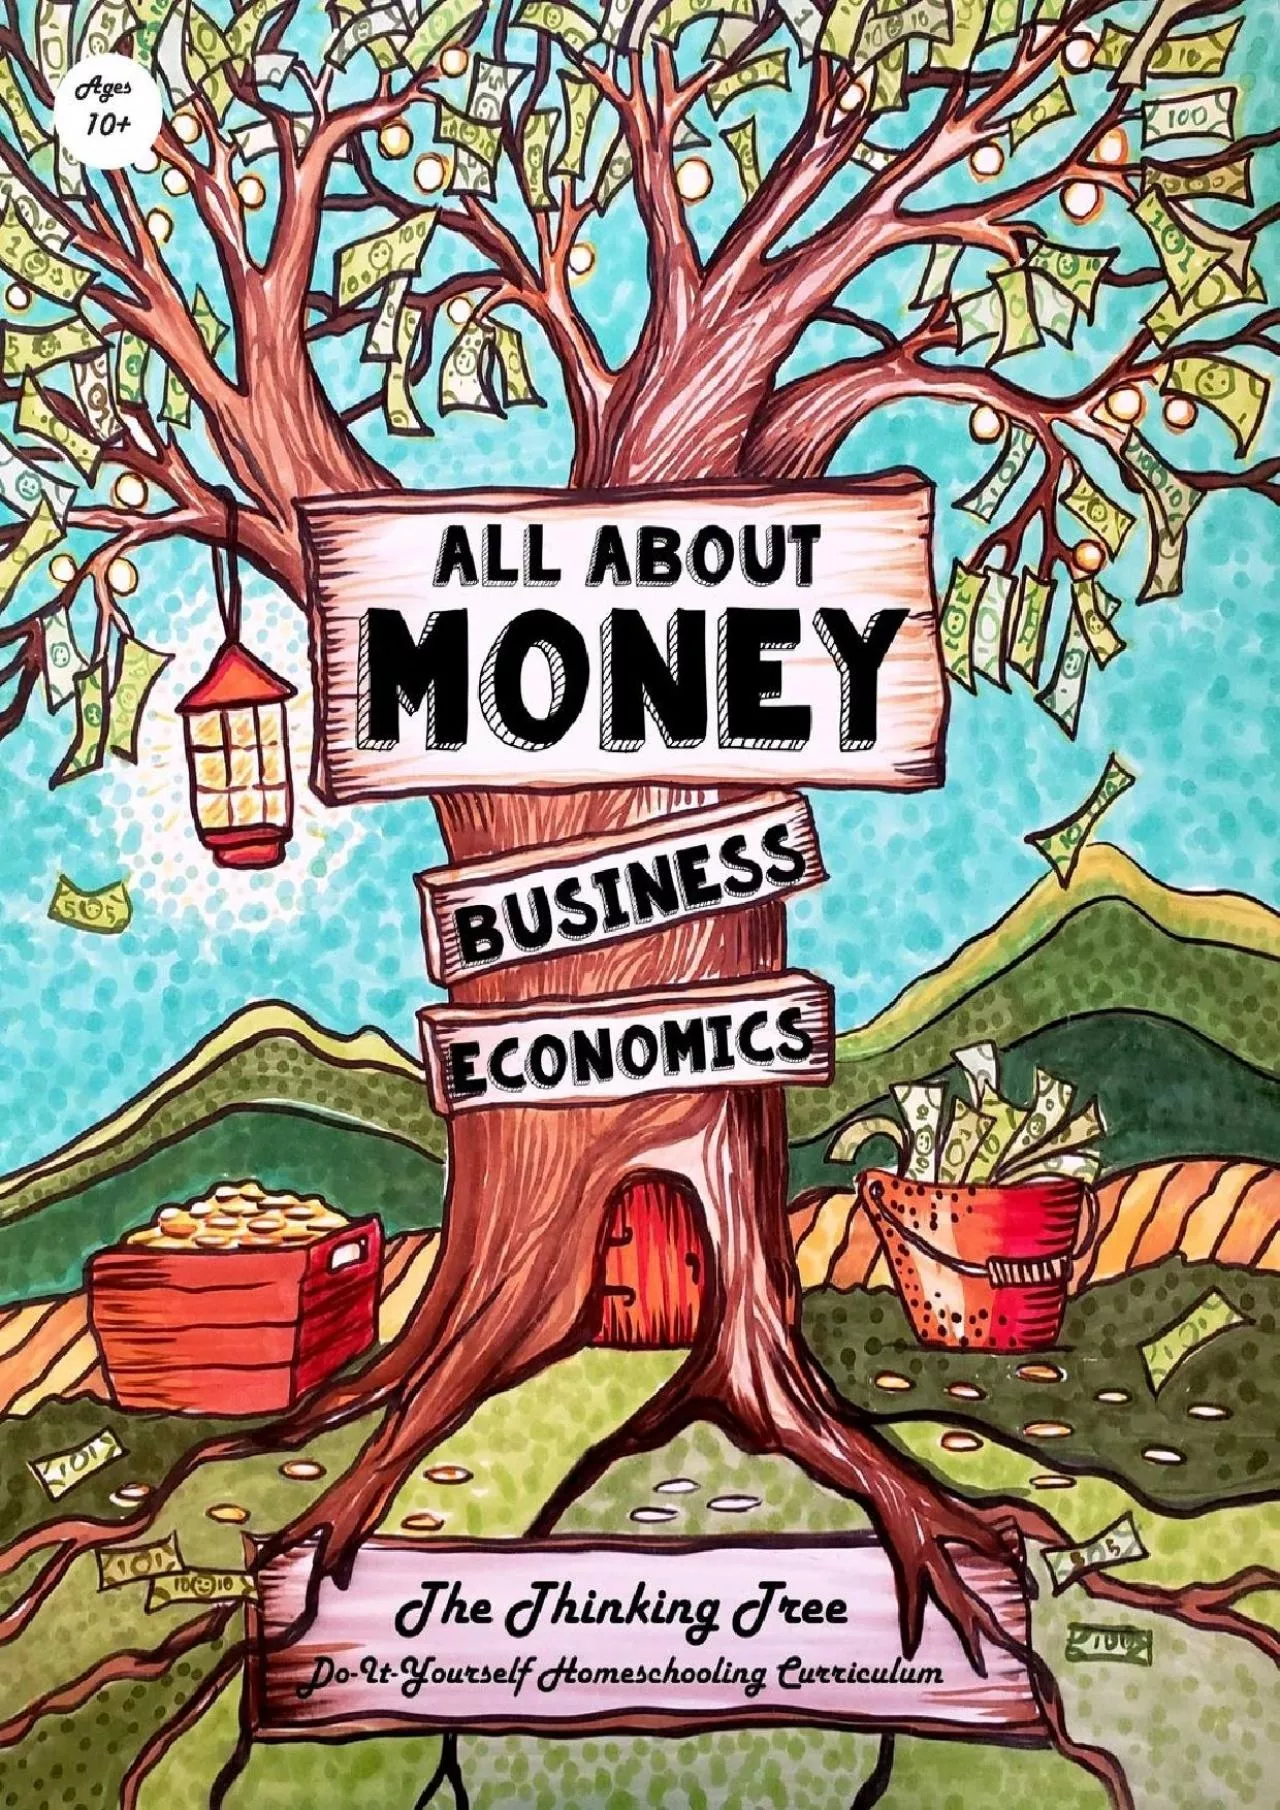 [READ] All About Money - Economics - Business - Ages 10+: The Thinking Tree - Do-It-Yourself